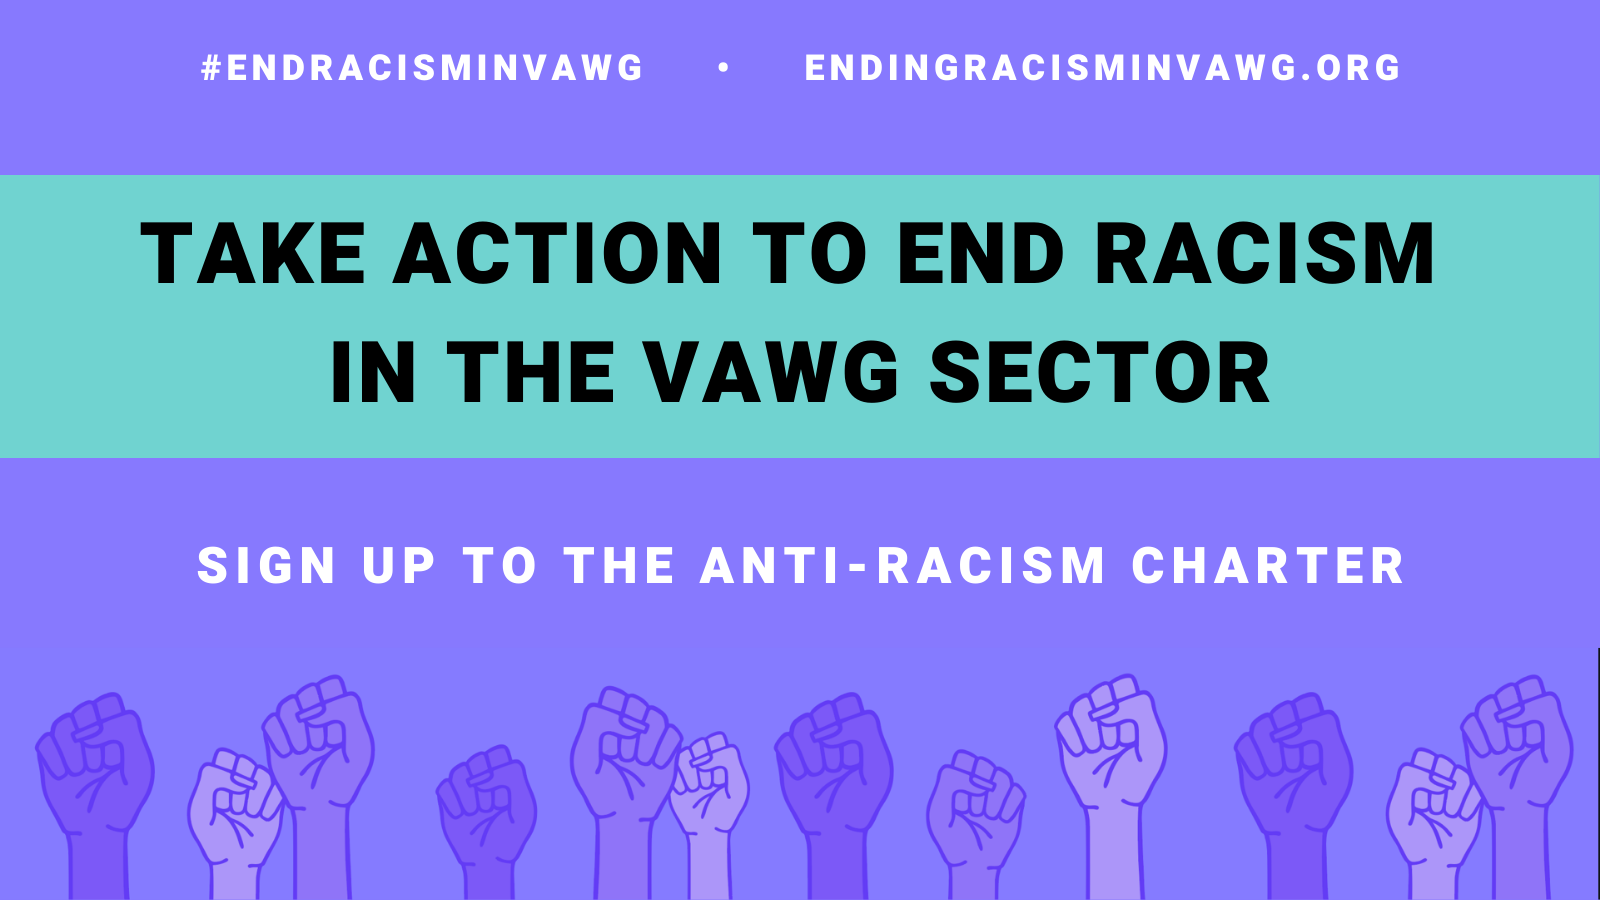 Take Action To End Racism In The VAWG Sector. Sign Up To The Anti-Racism Charter